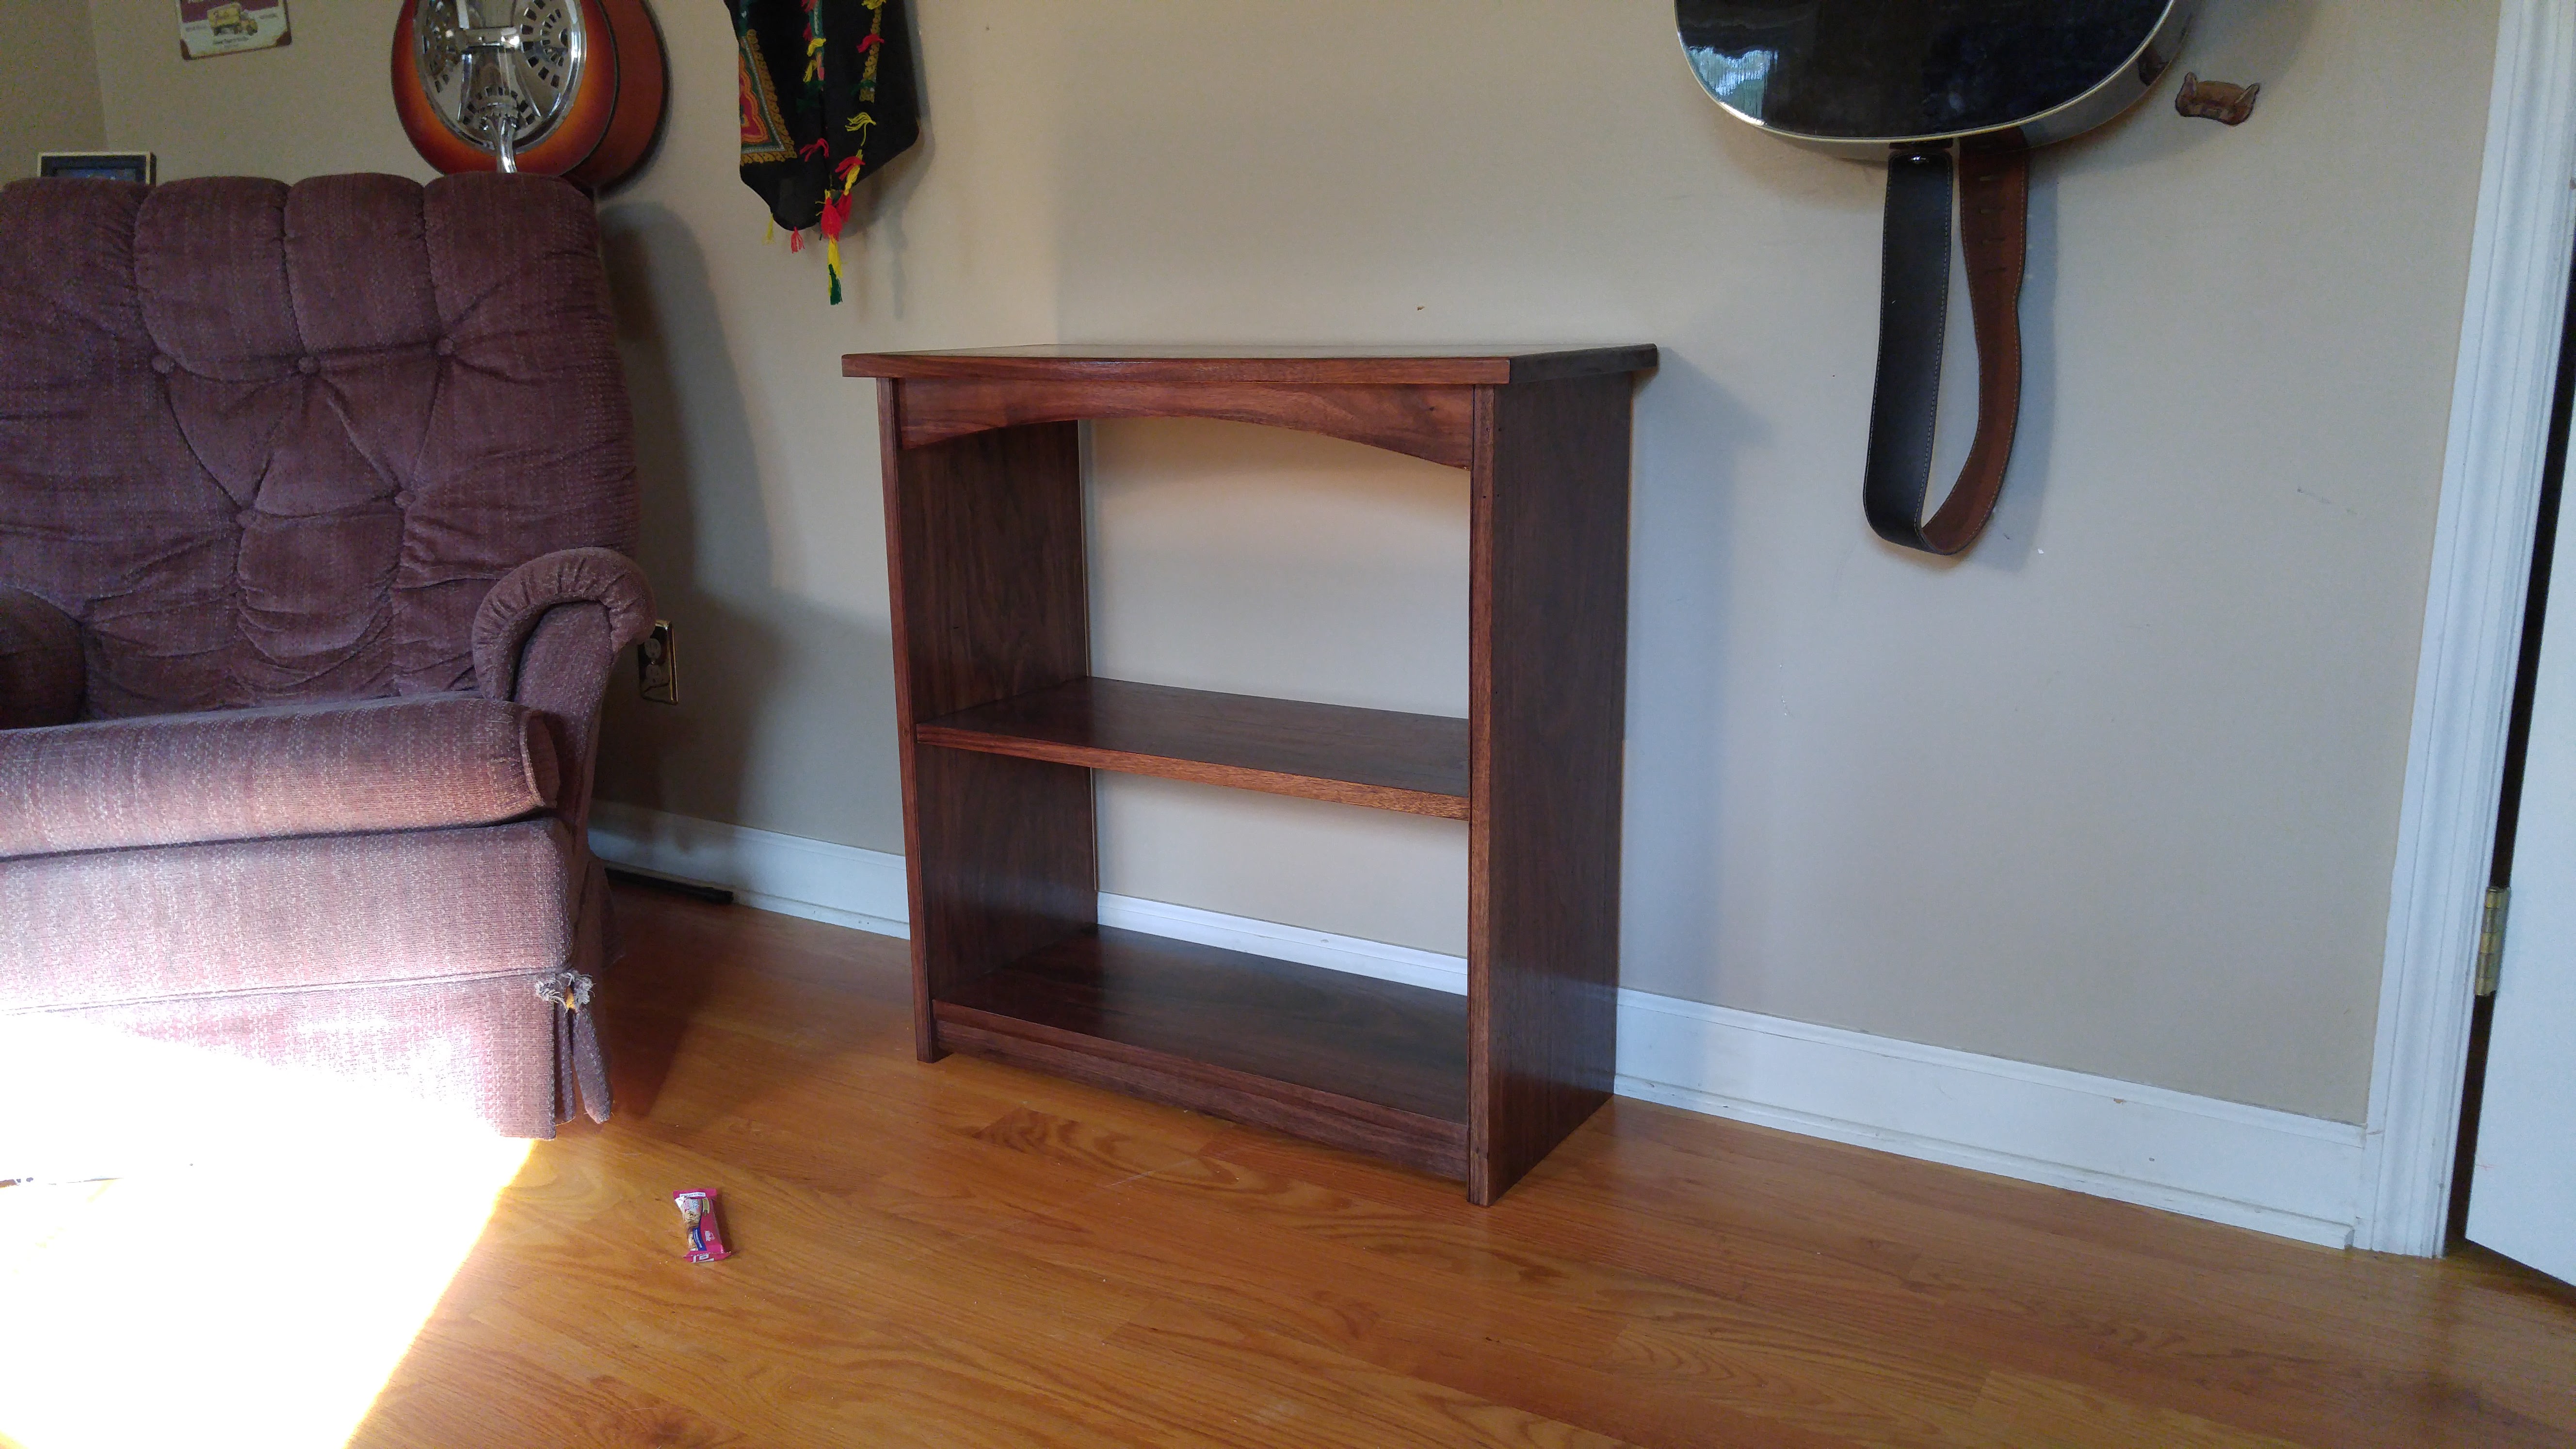 My first handtool project, a walnut bookcase